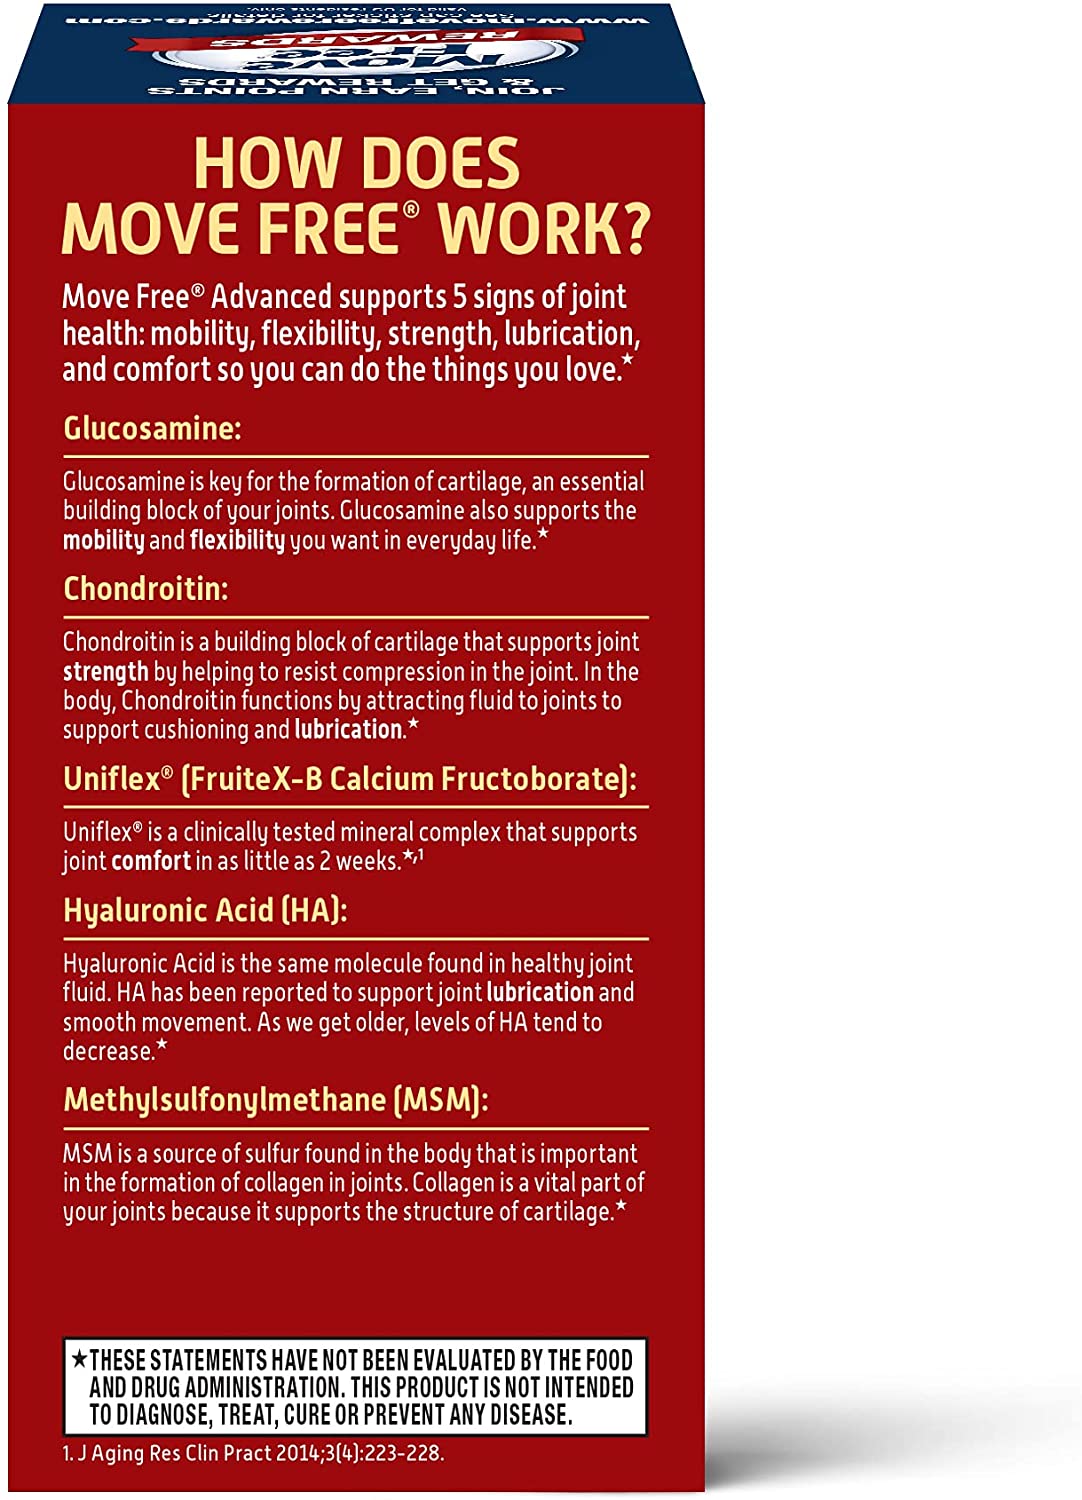 Move Free Advanced MSM 1500mg, 120 Coated Tablets